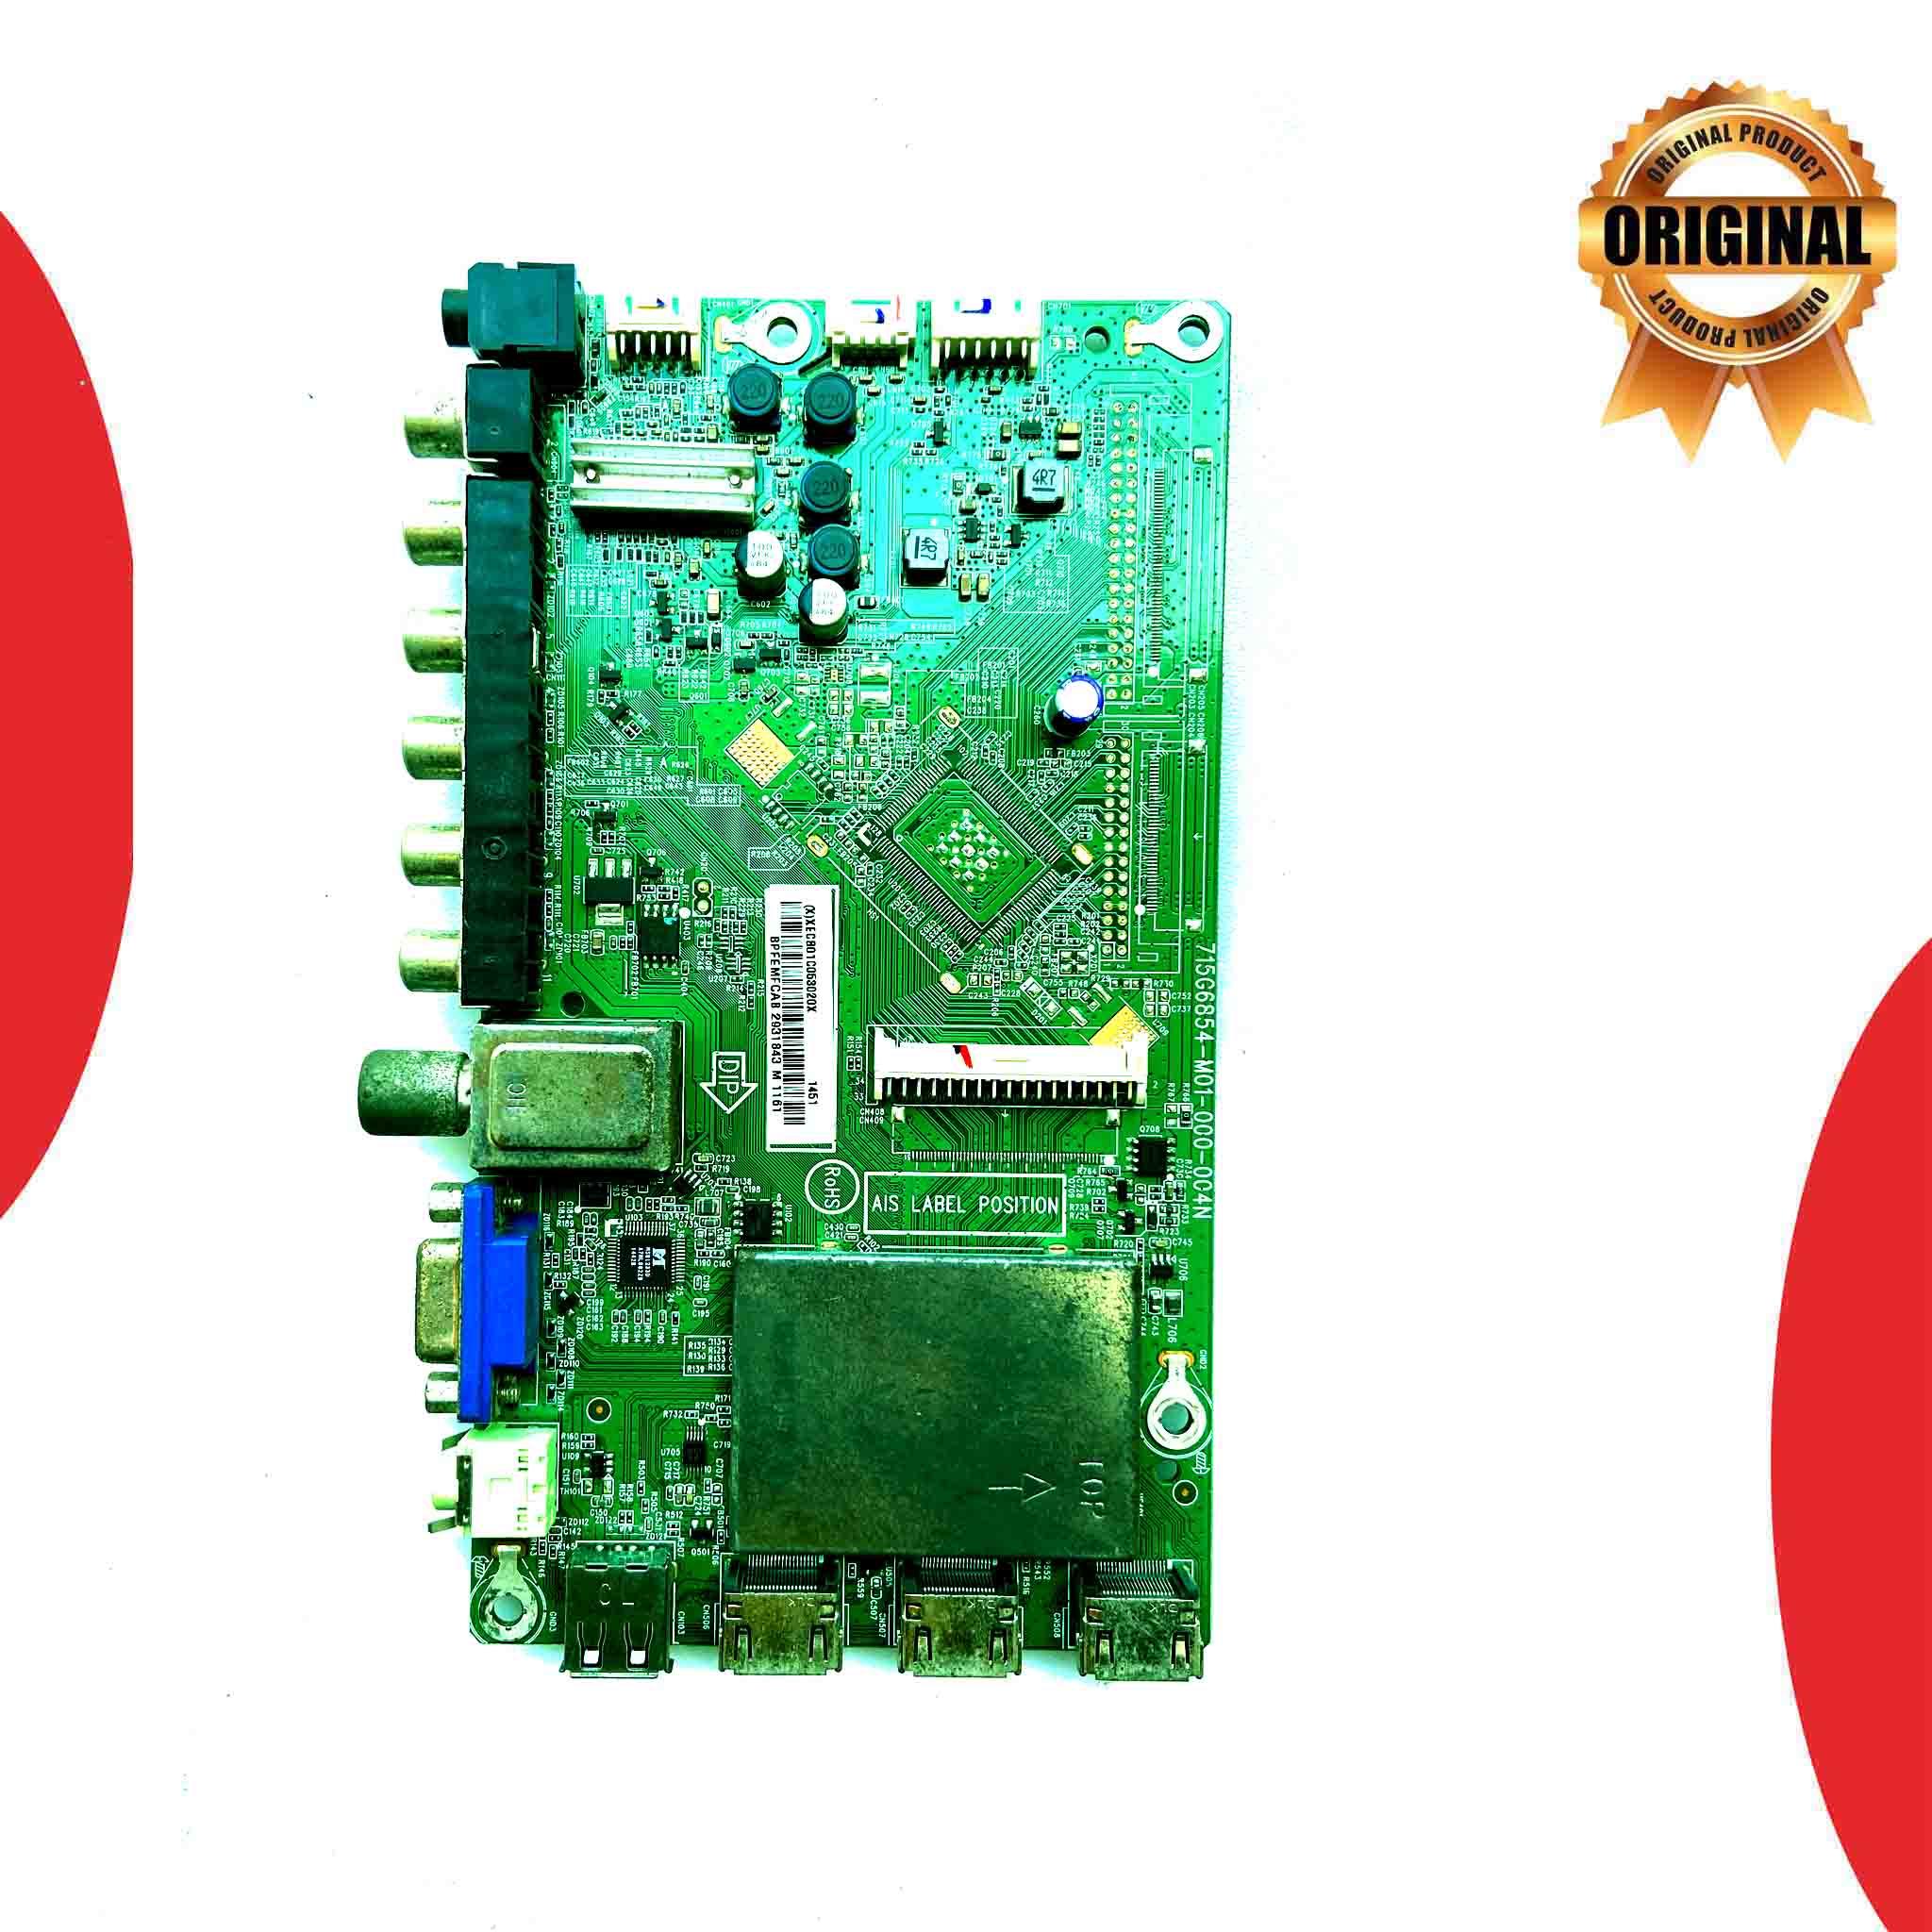 Model LC40LE460X Sharp LED TV Motherboard - Great Bharat Electronics